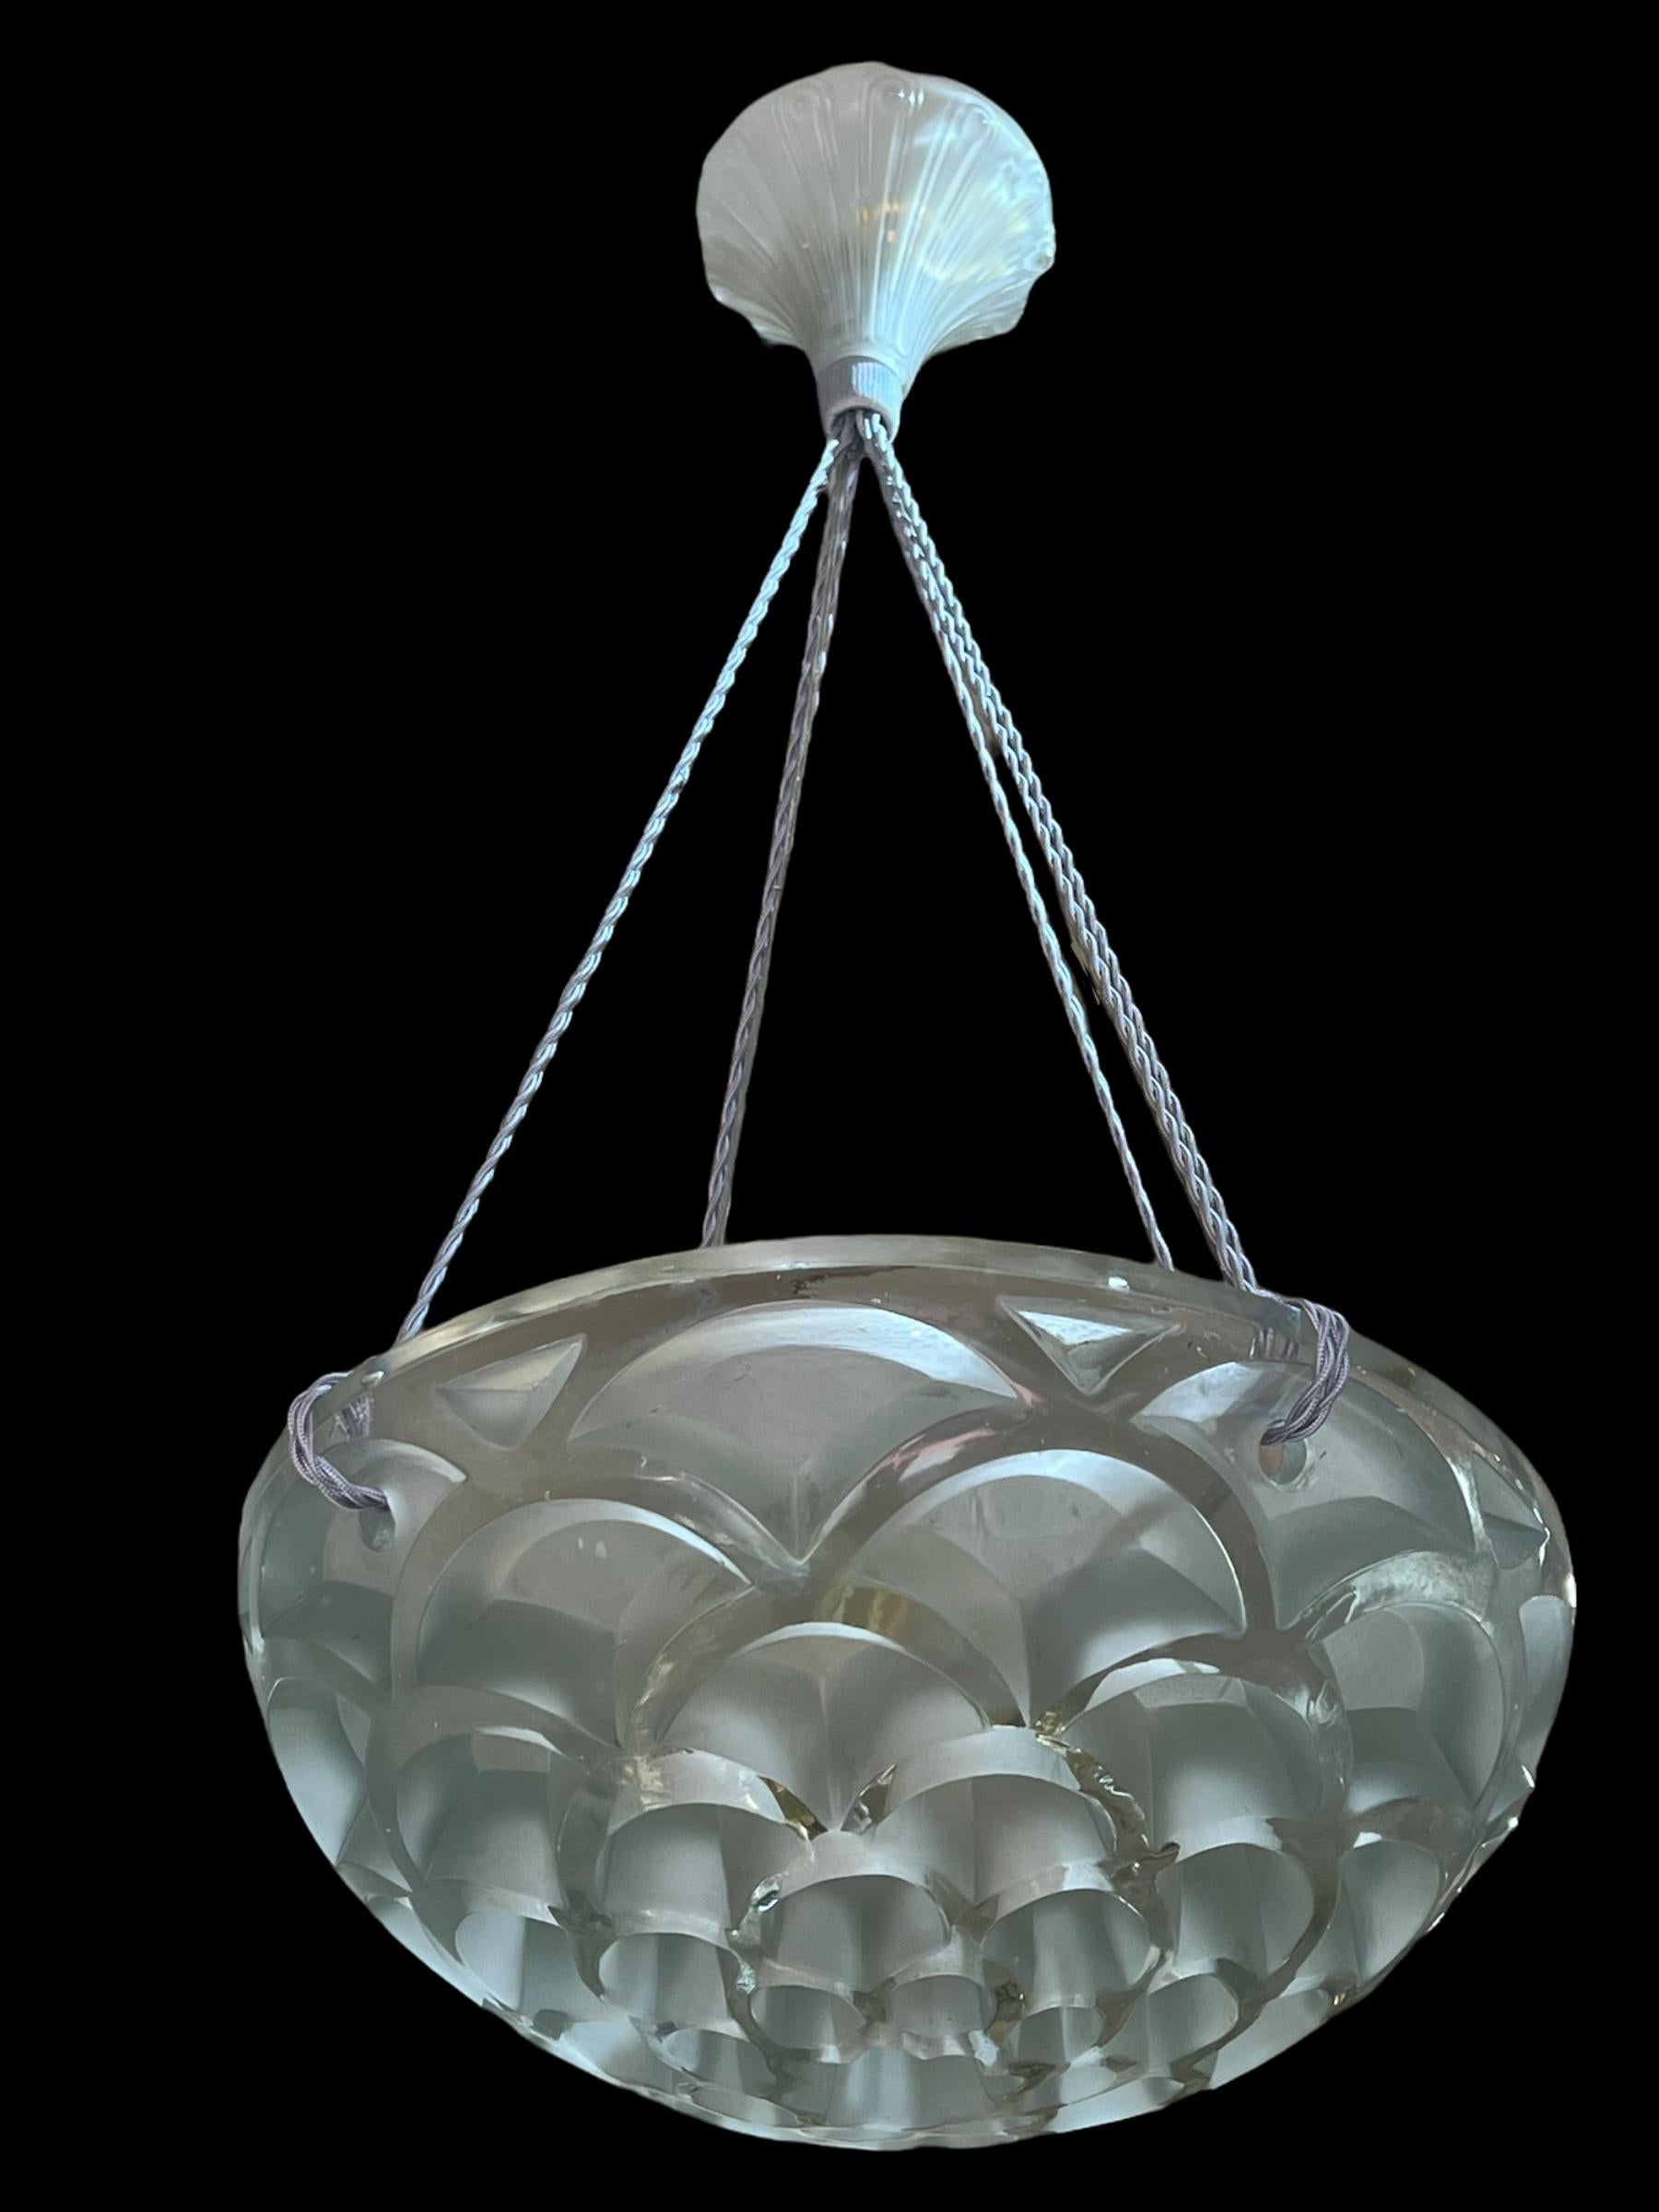 Molded 1926 Rene Lalique Rinceaux Pair of Ceiling Lights Chandeliers Glass